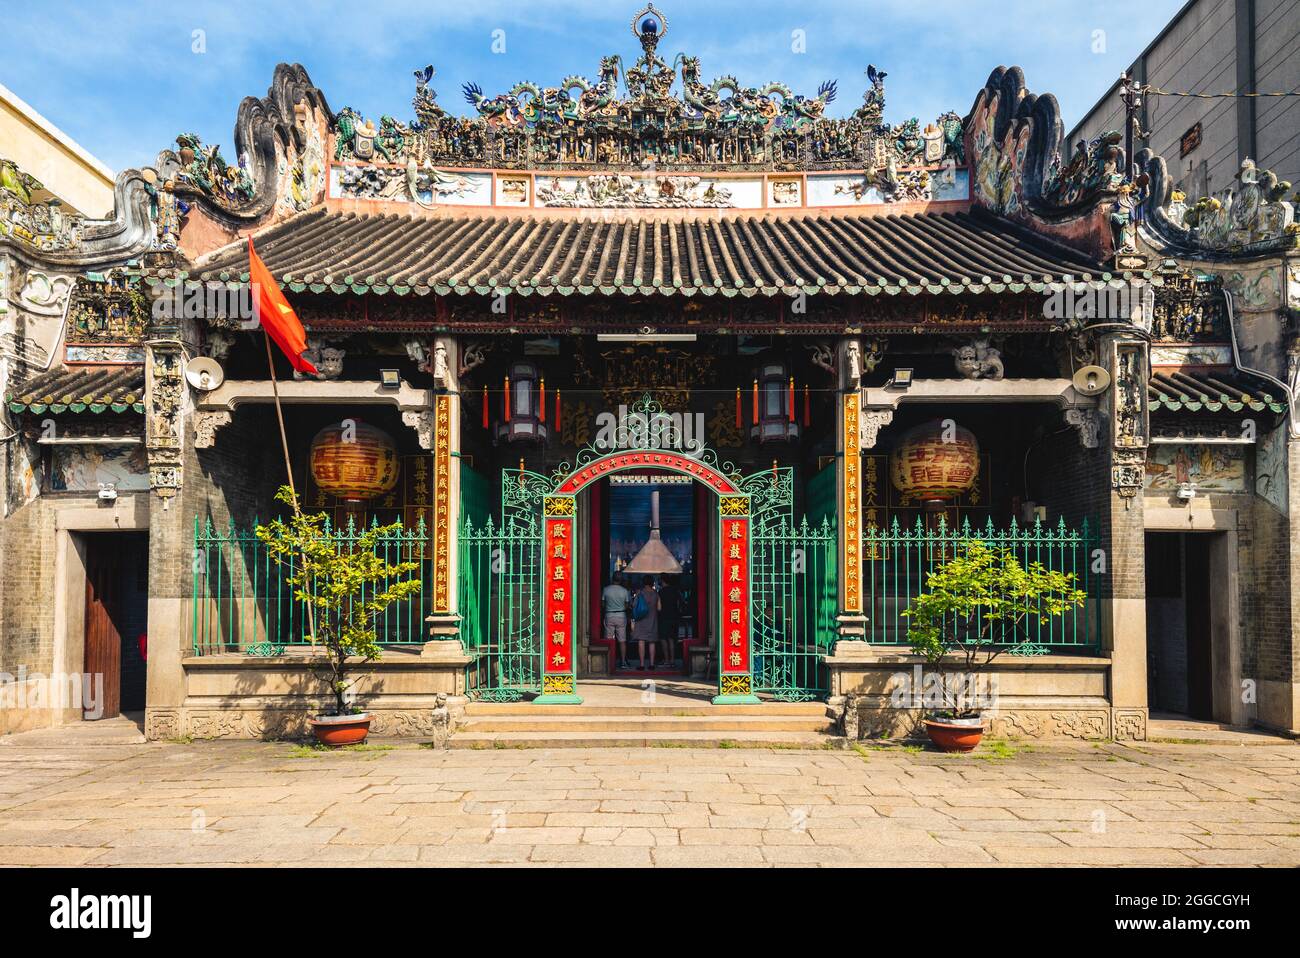 January 2, 2017: Ba Thien Hau Temple, heavenly queen temple, in Cholon district of saigon, Vietnam. It is a Buddhist temple built in 1760 dedicated to Stock Photo